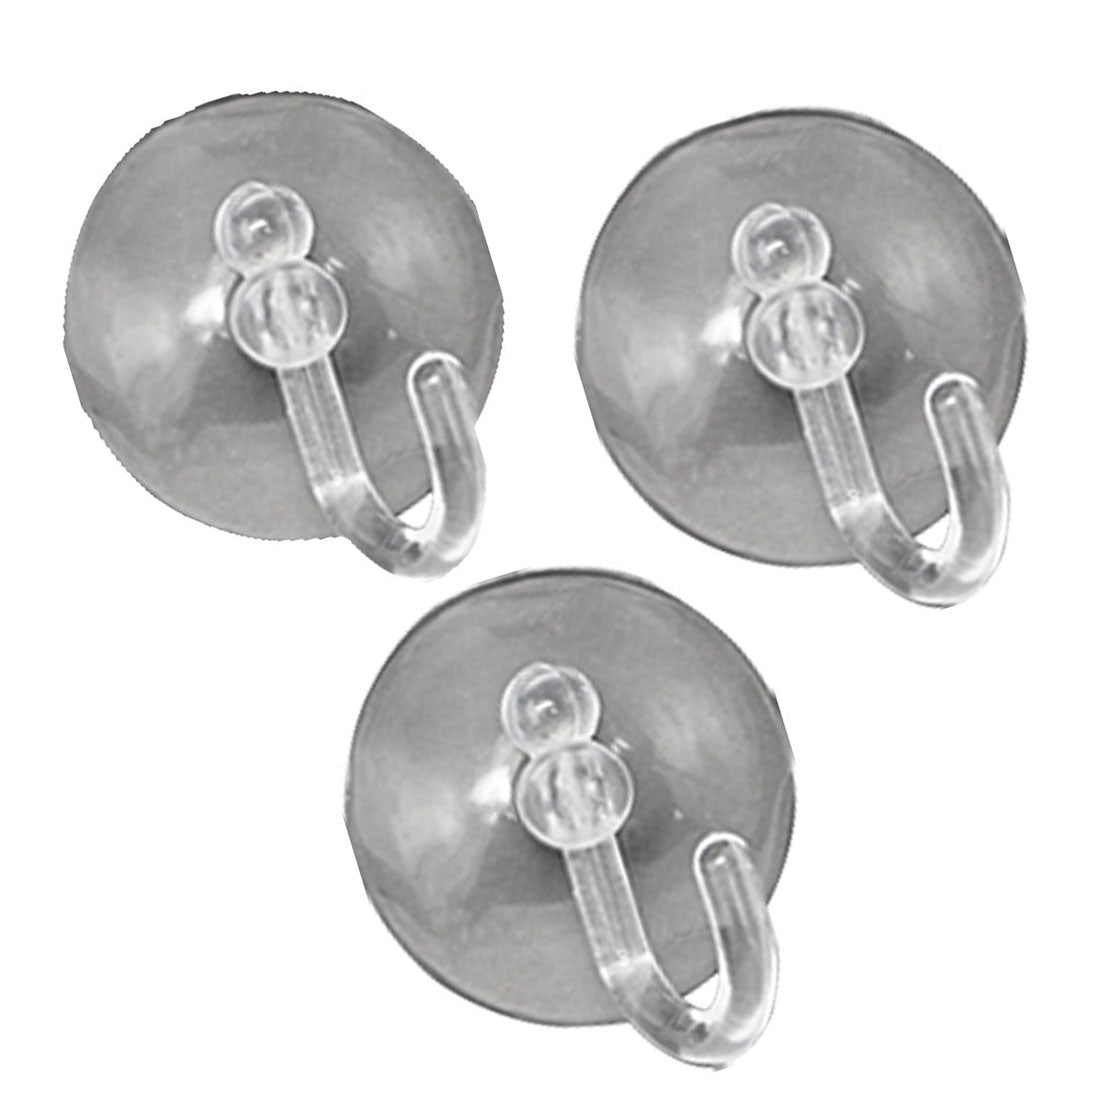 uxcell Uxcell Clear Briefness Design Suction Cup Adhesion Hook 3PCs